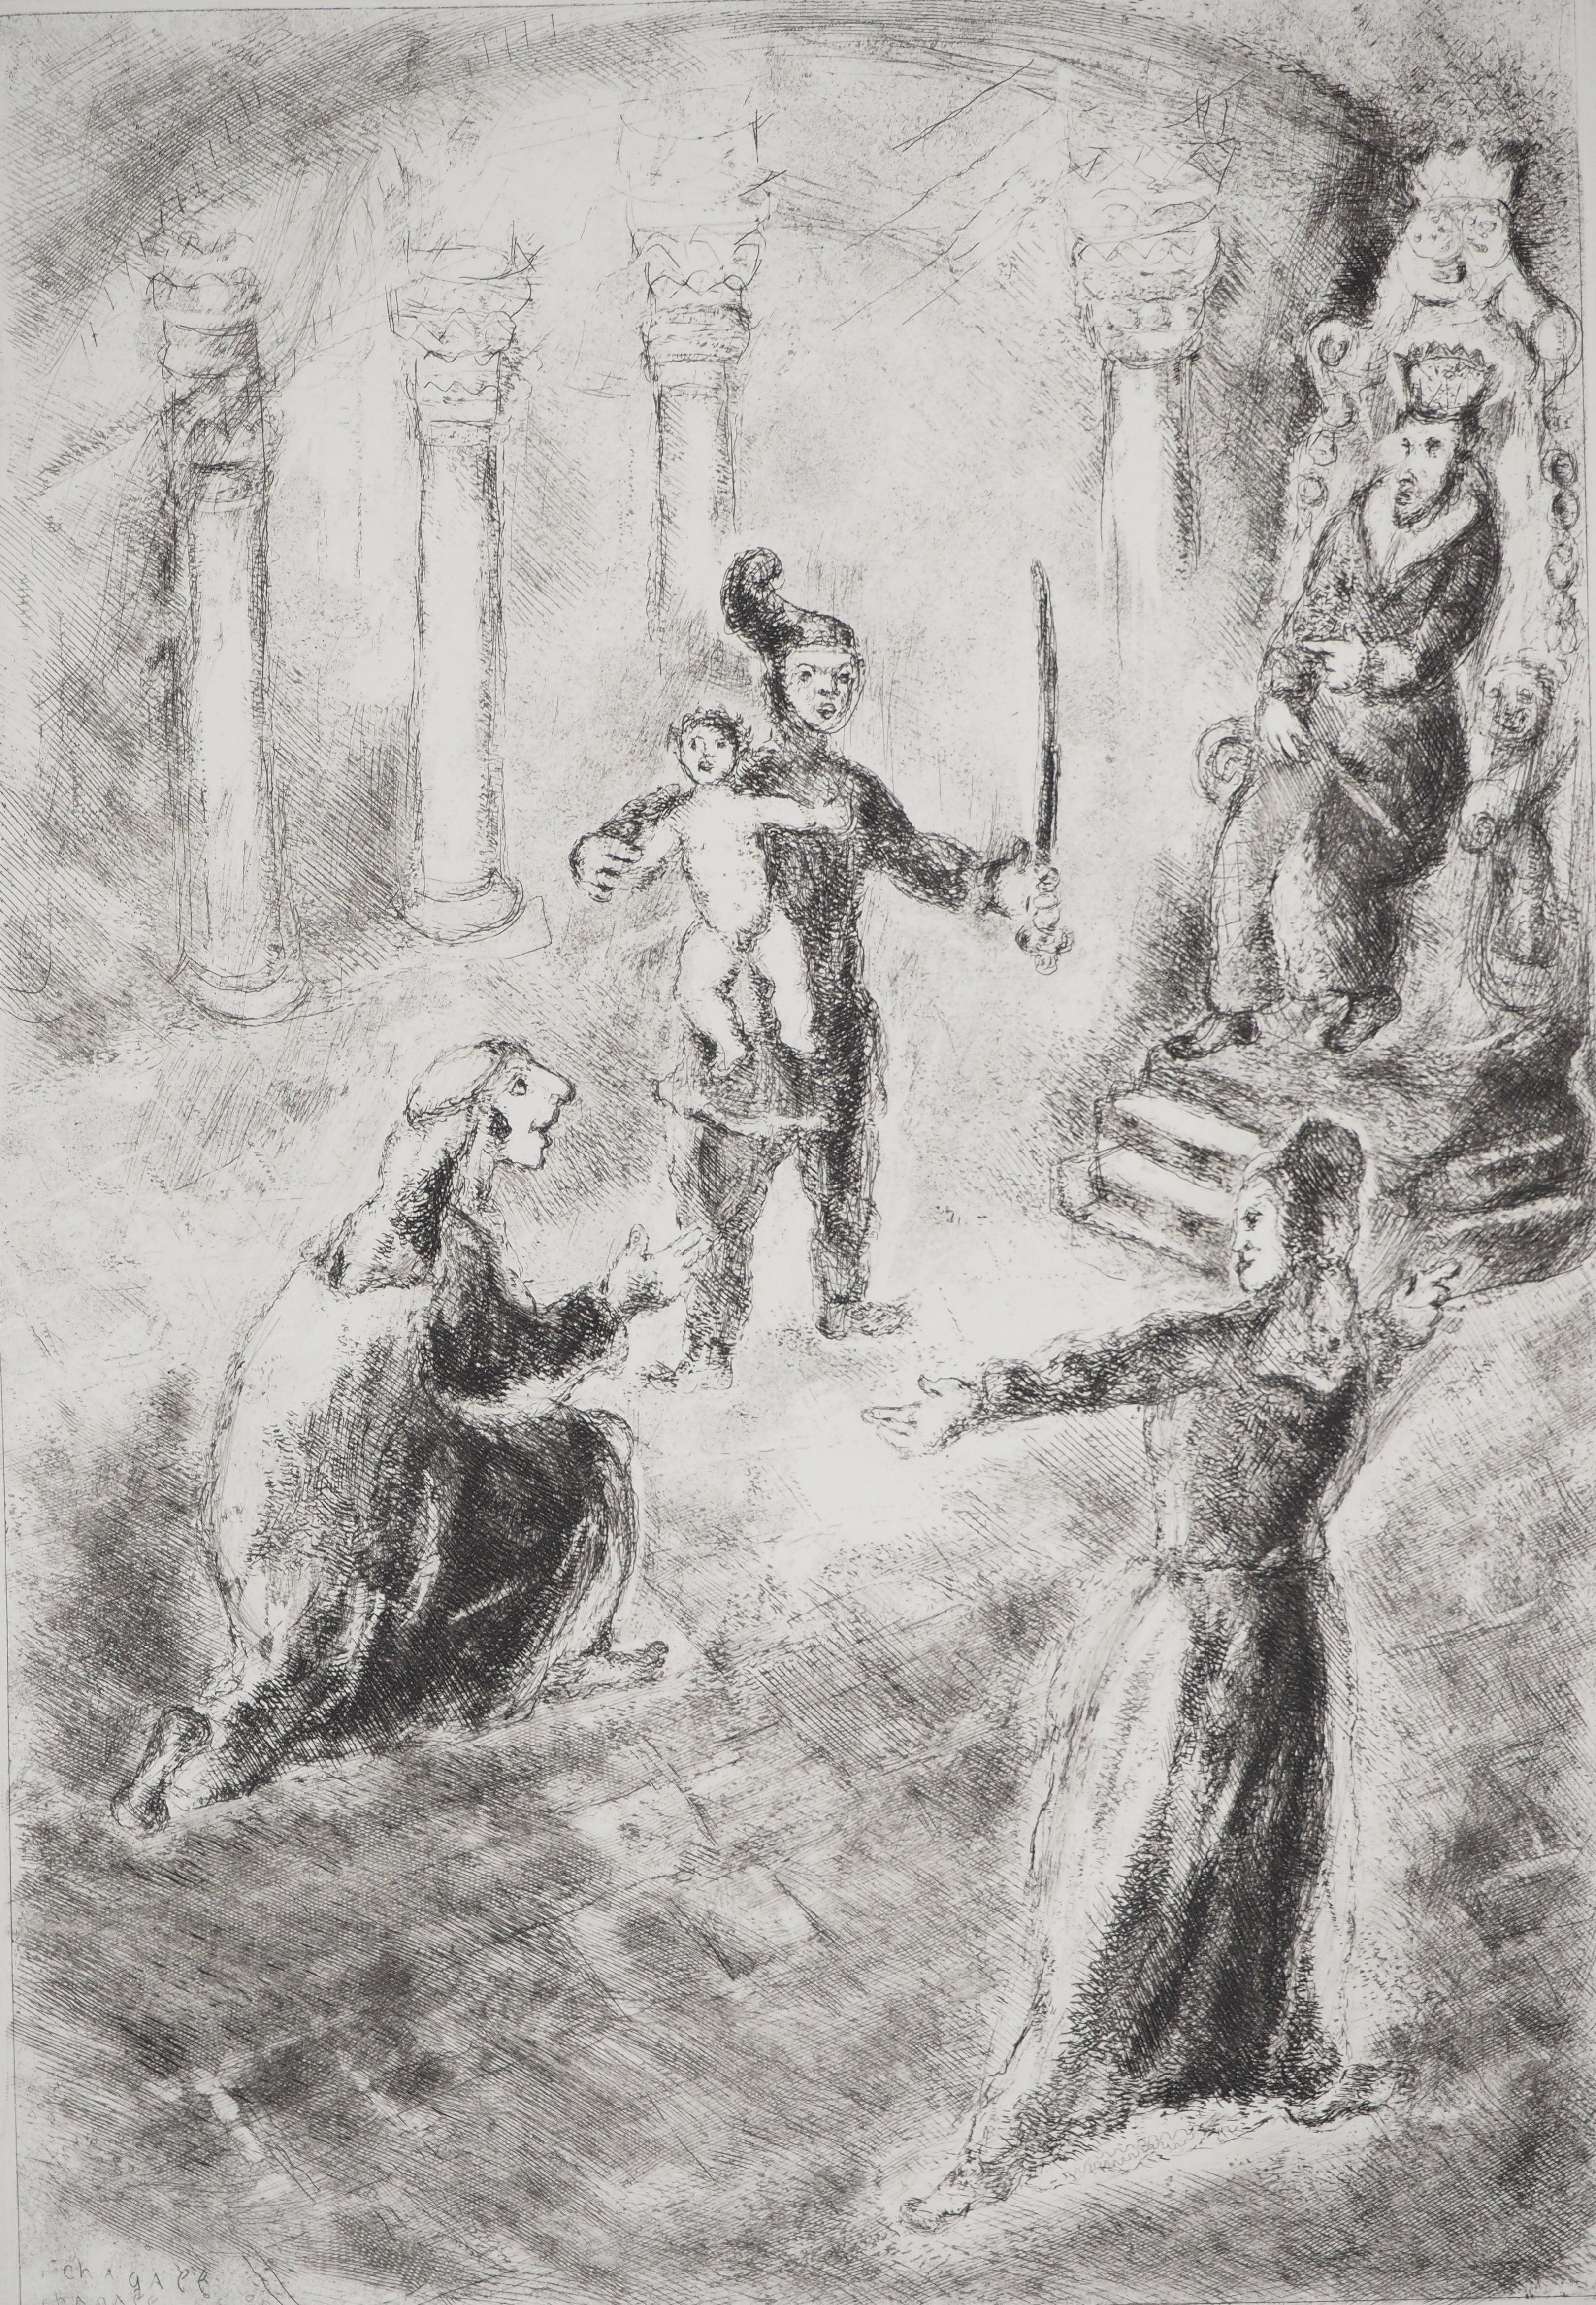 Marc Chagall (1887-1958)
Bible : The judgment of Solomon (Le jugement de Salomon), 1939

Original etching
Printed signature in the plate
On Montval vellum, 44 x 33.5 cm (c. 17.3 x 13.1 inch)

INFORMATION: Published by Vollard / Tériade in